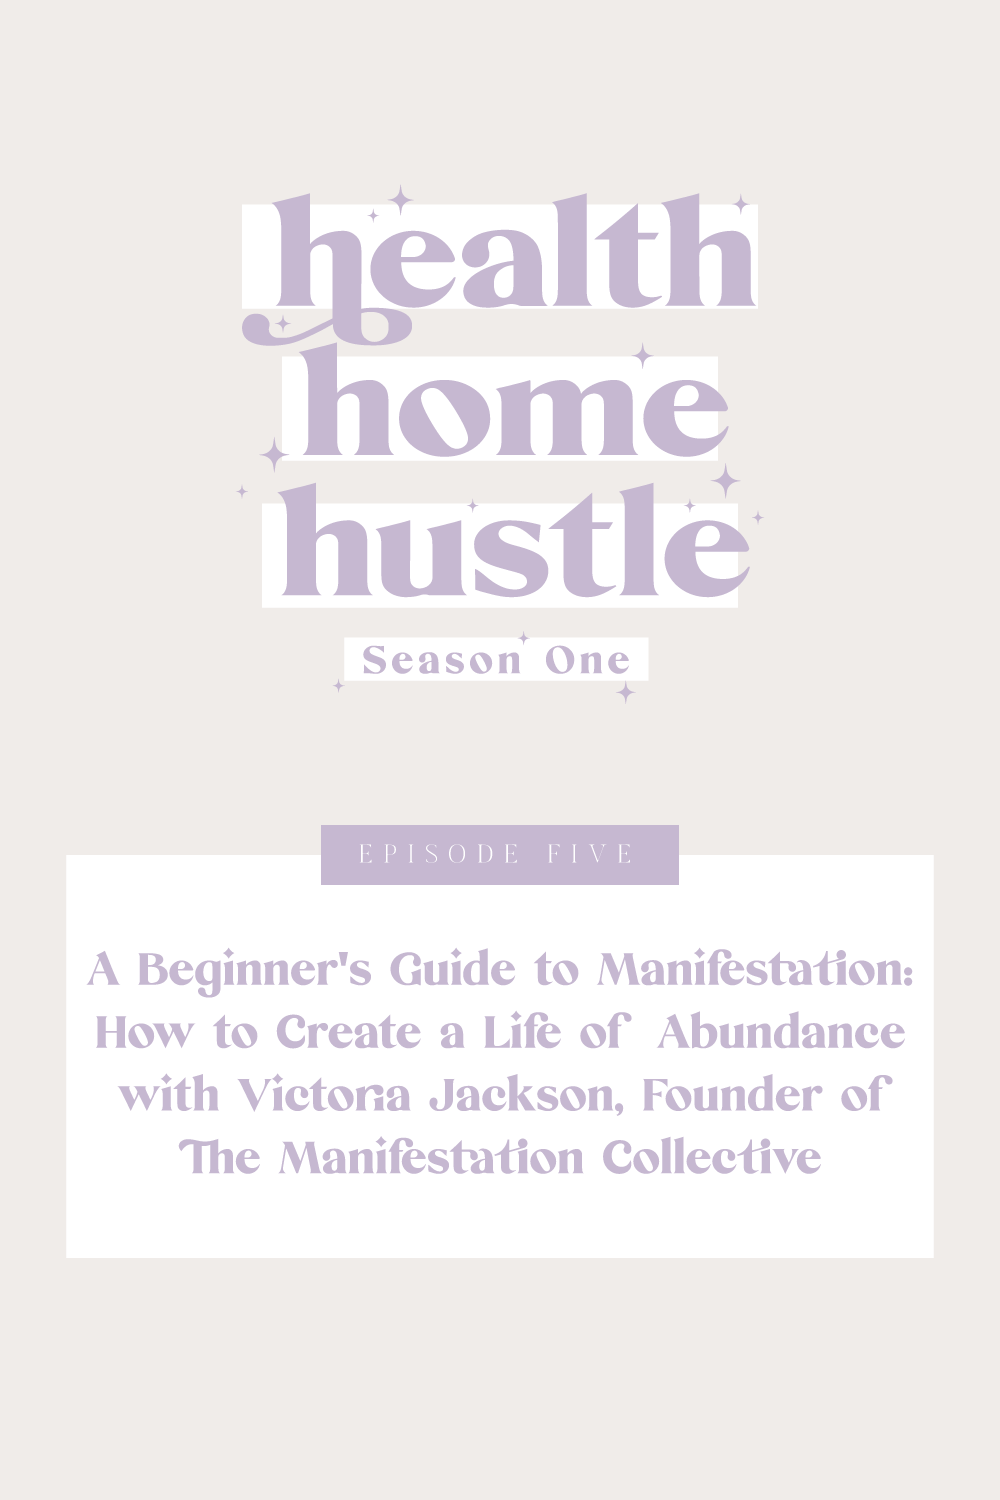 A Beginner's Guide to Manifestation: How to Create a Life of Abundance with Victoria Jackson, Founder of The Manifestation Collective